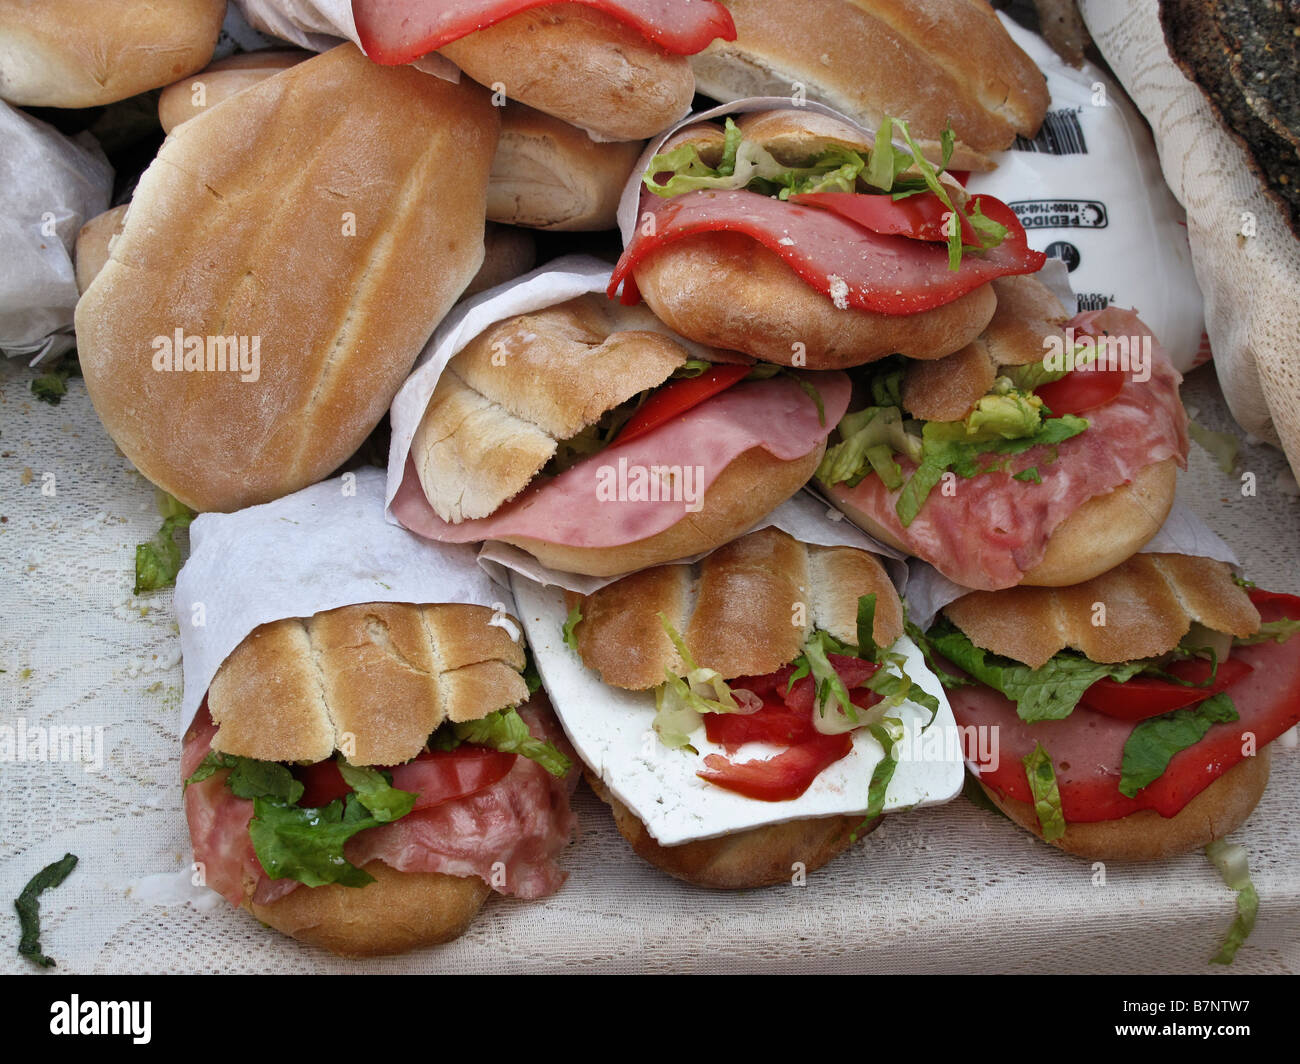 pile of mouth watering meat sandwiches garnished with lettuce & tomato for sale at an outdoor vendor in Mexico City, DF, Mexico Stock Photo